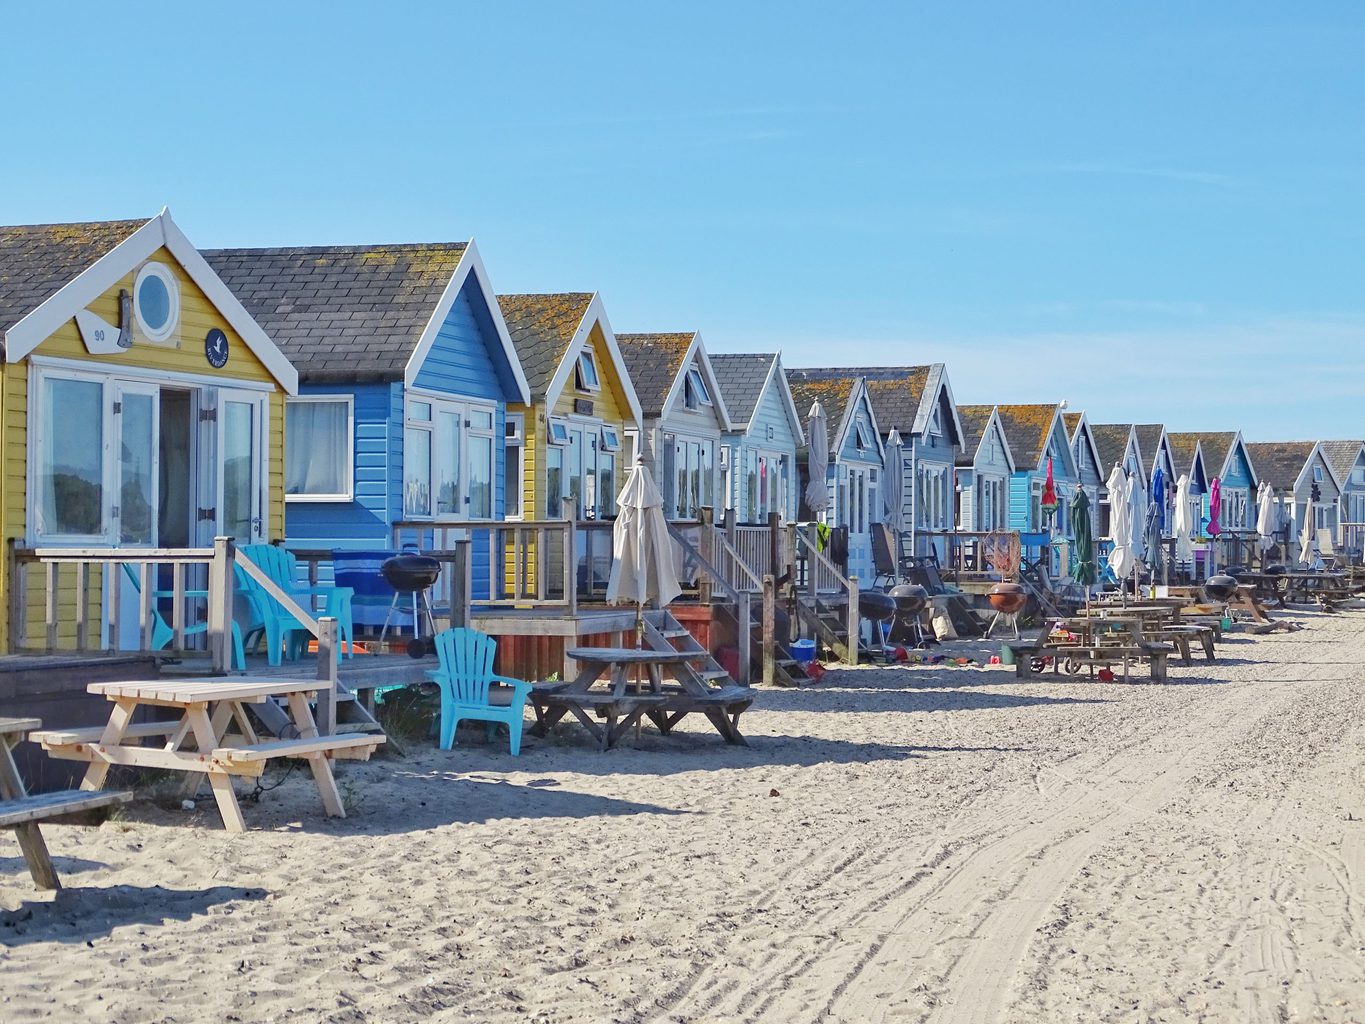 A row of beach huts painted alternatively yellow and blue with wooden picnic tables in front and a white sandy beach in front of that on a very sunny day with clear blue sky above - Mudeford Sandbank at Hengistbury Head in Christchurch Dorset England